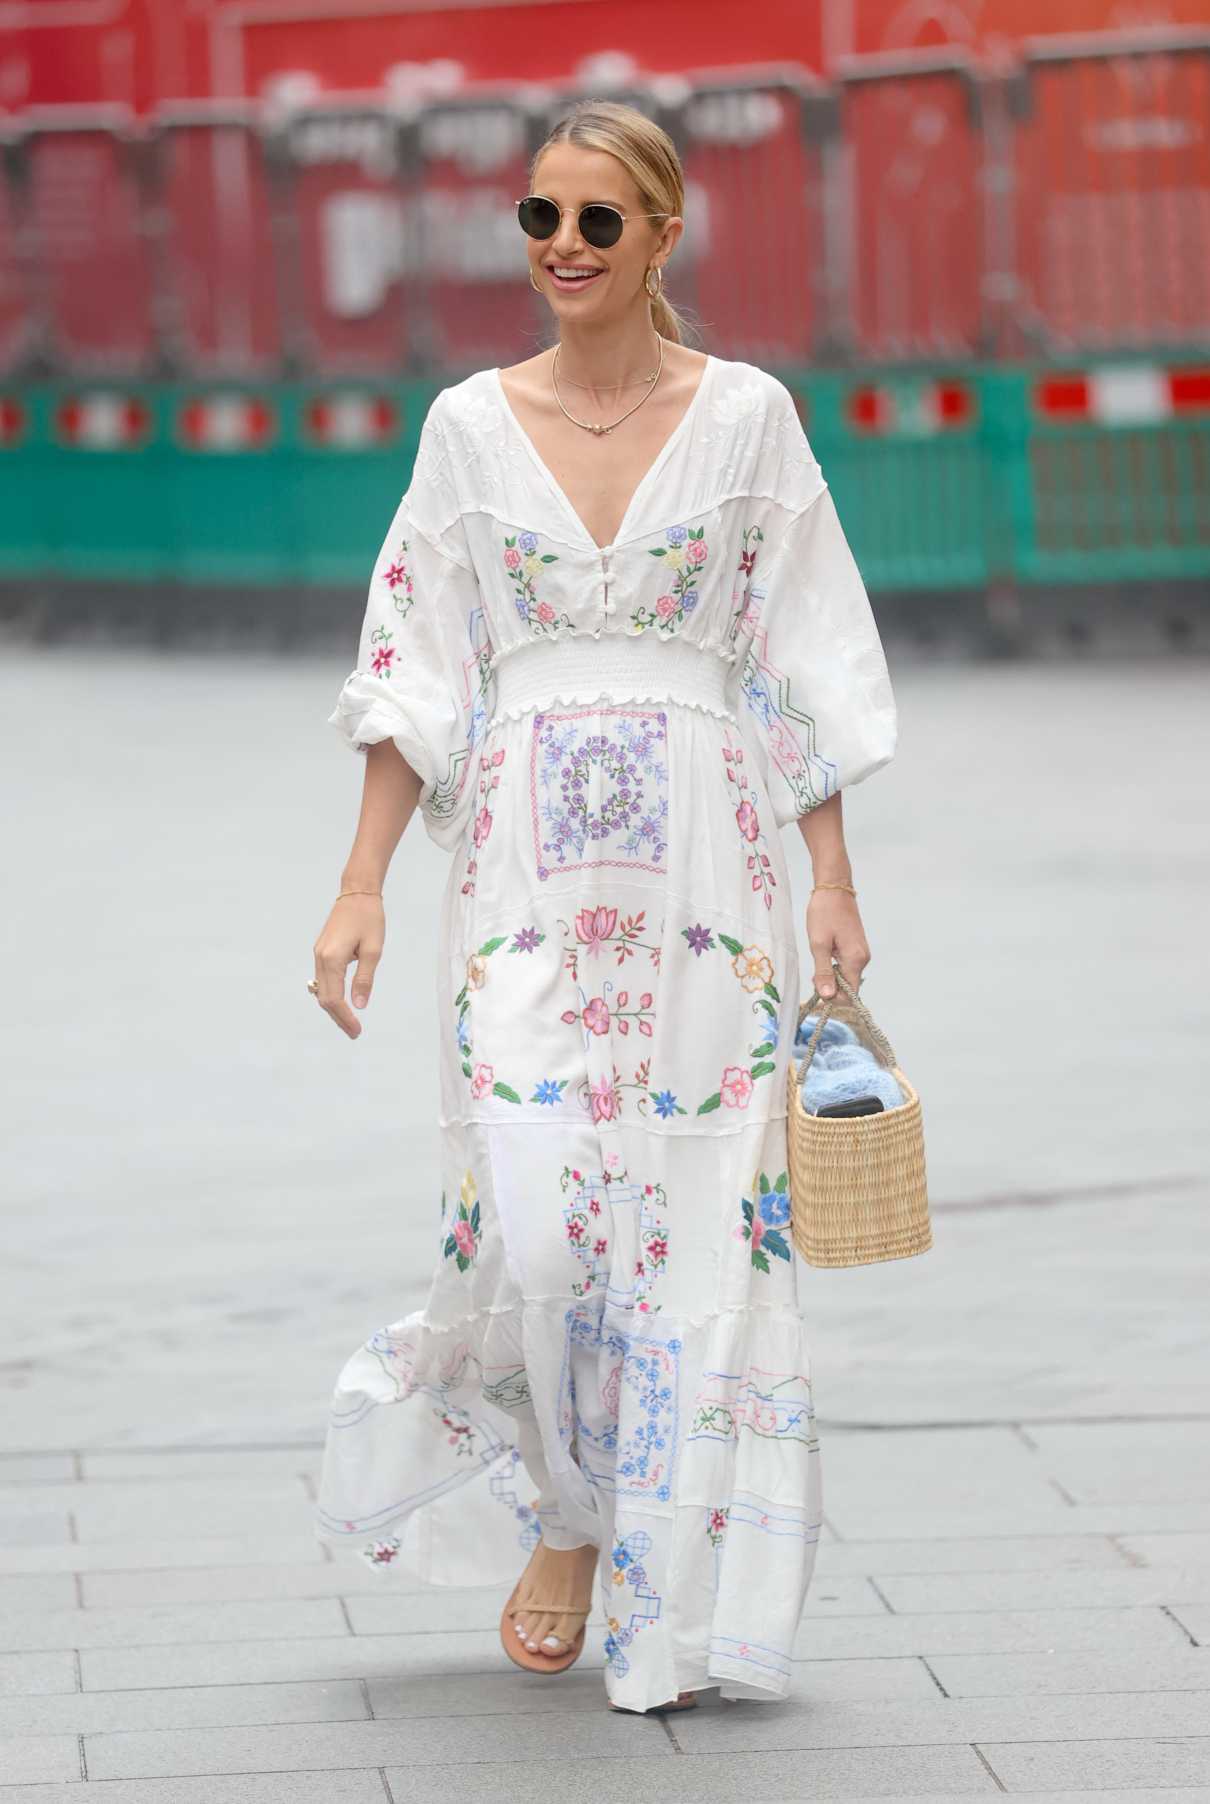 Vogue Williams in a White Summer Floral Dress